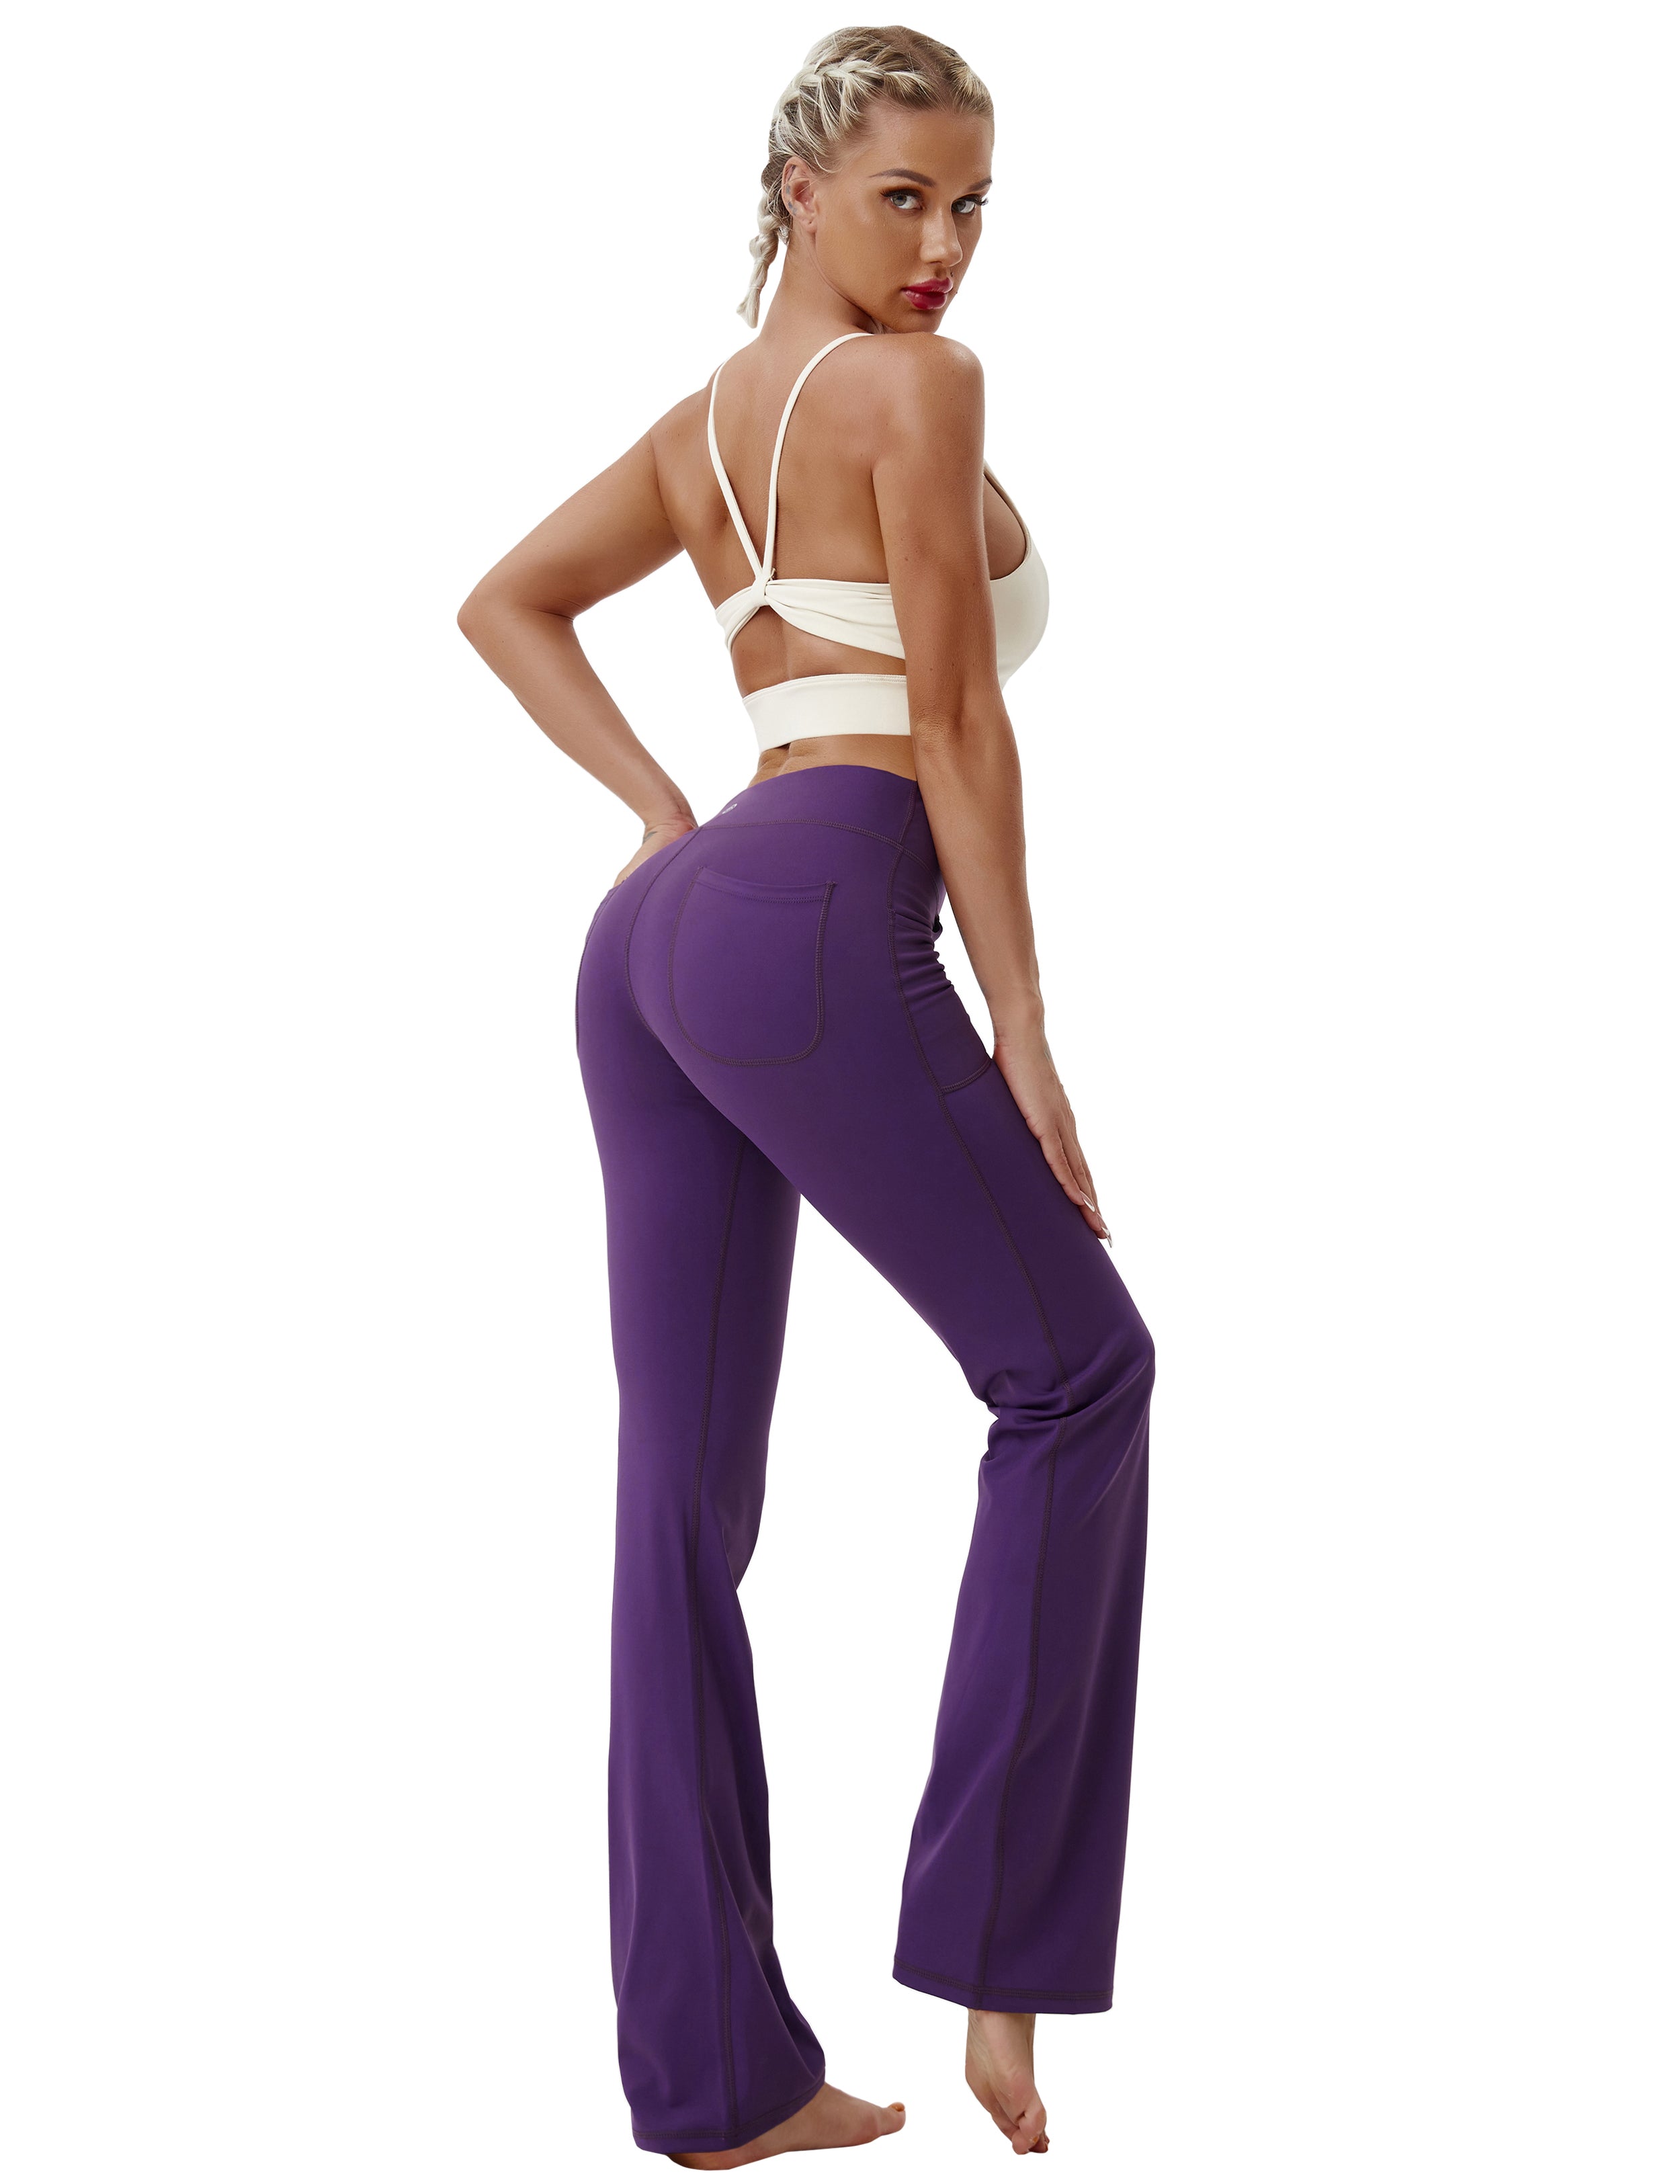 4 Pockets Bootcut Leggings eggplantpurple 75%Nylon/25%Spandex Fabric doesn't attract lint easily 4-way stretch No see-through Moisture-wicking Inner pocket Four lengths